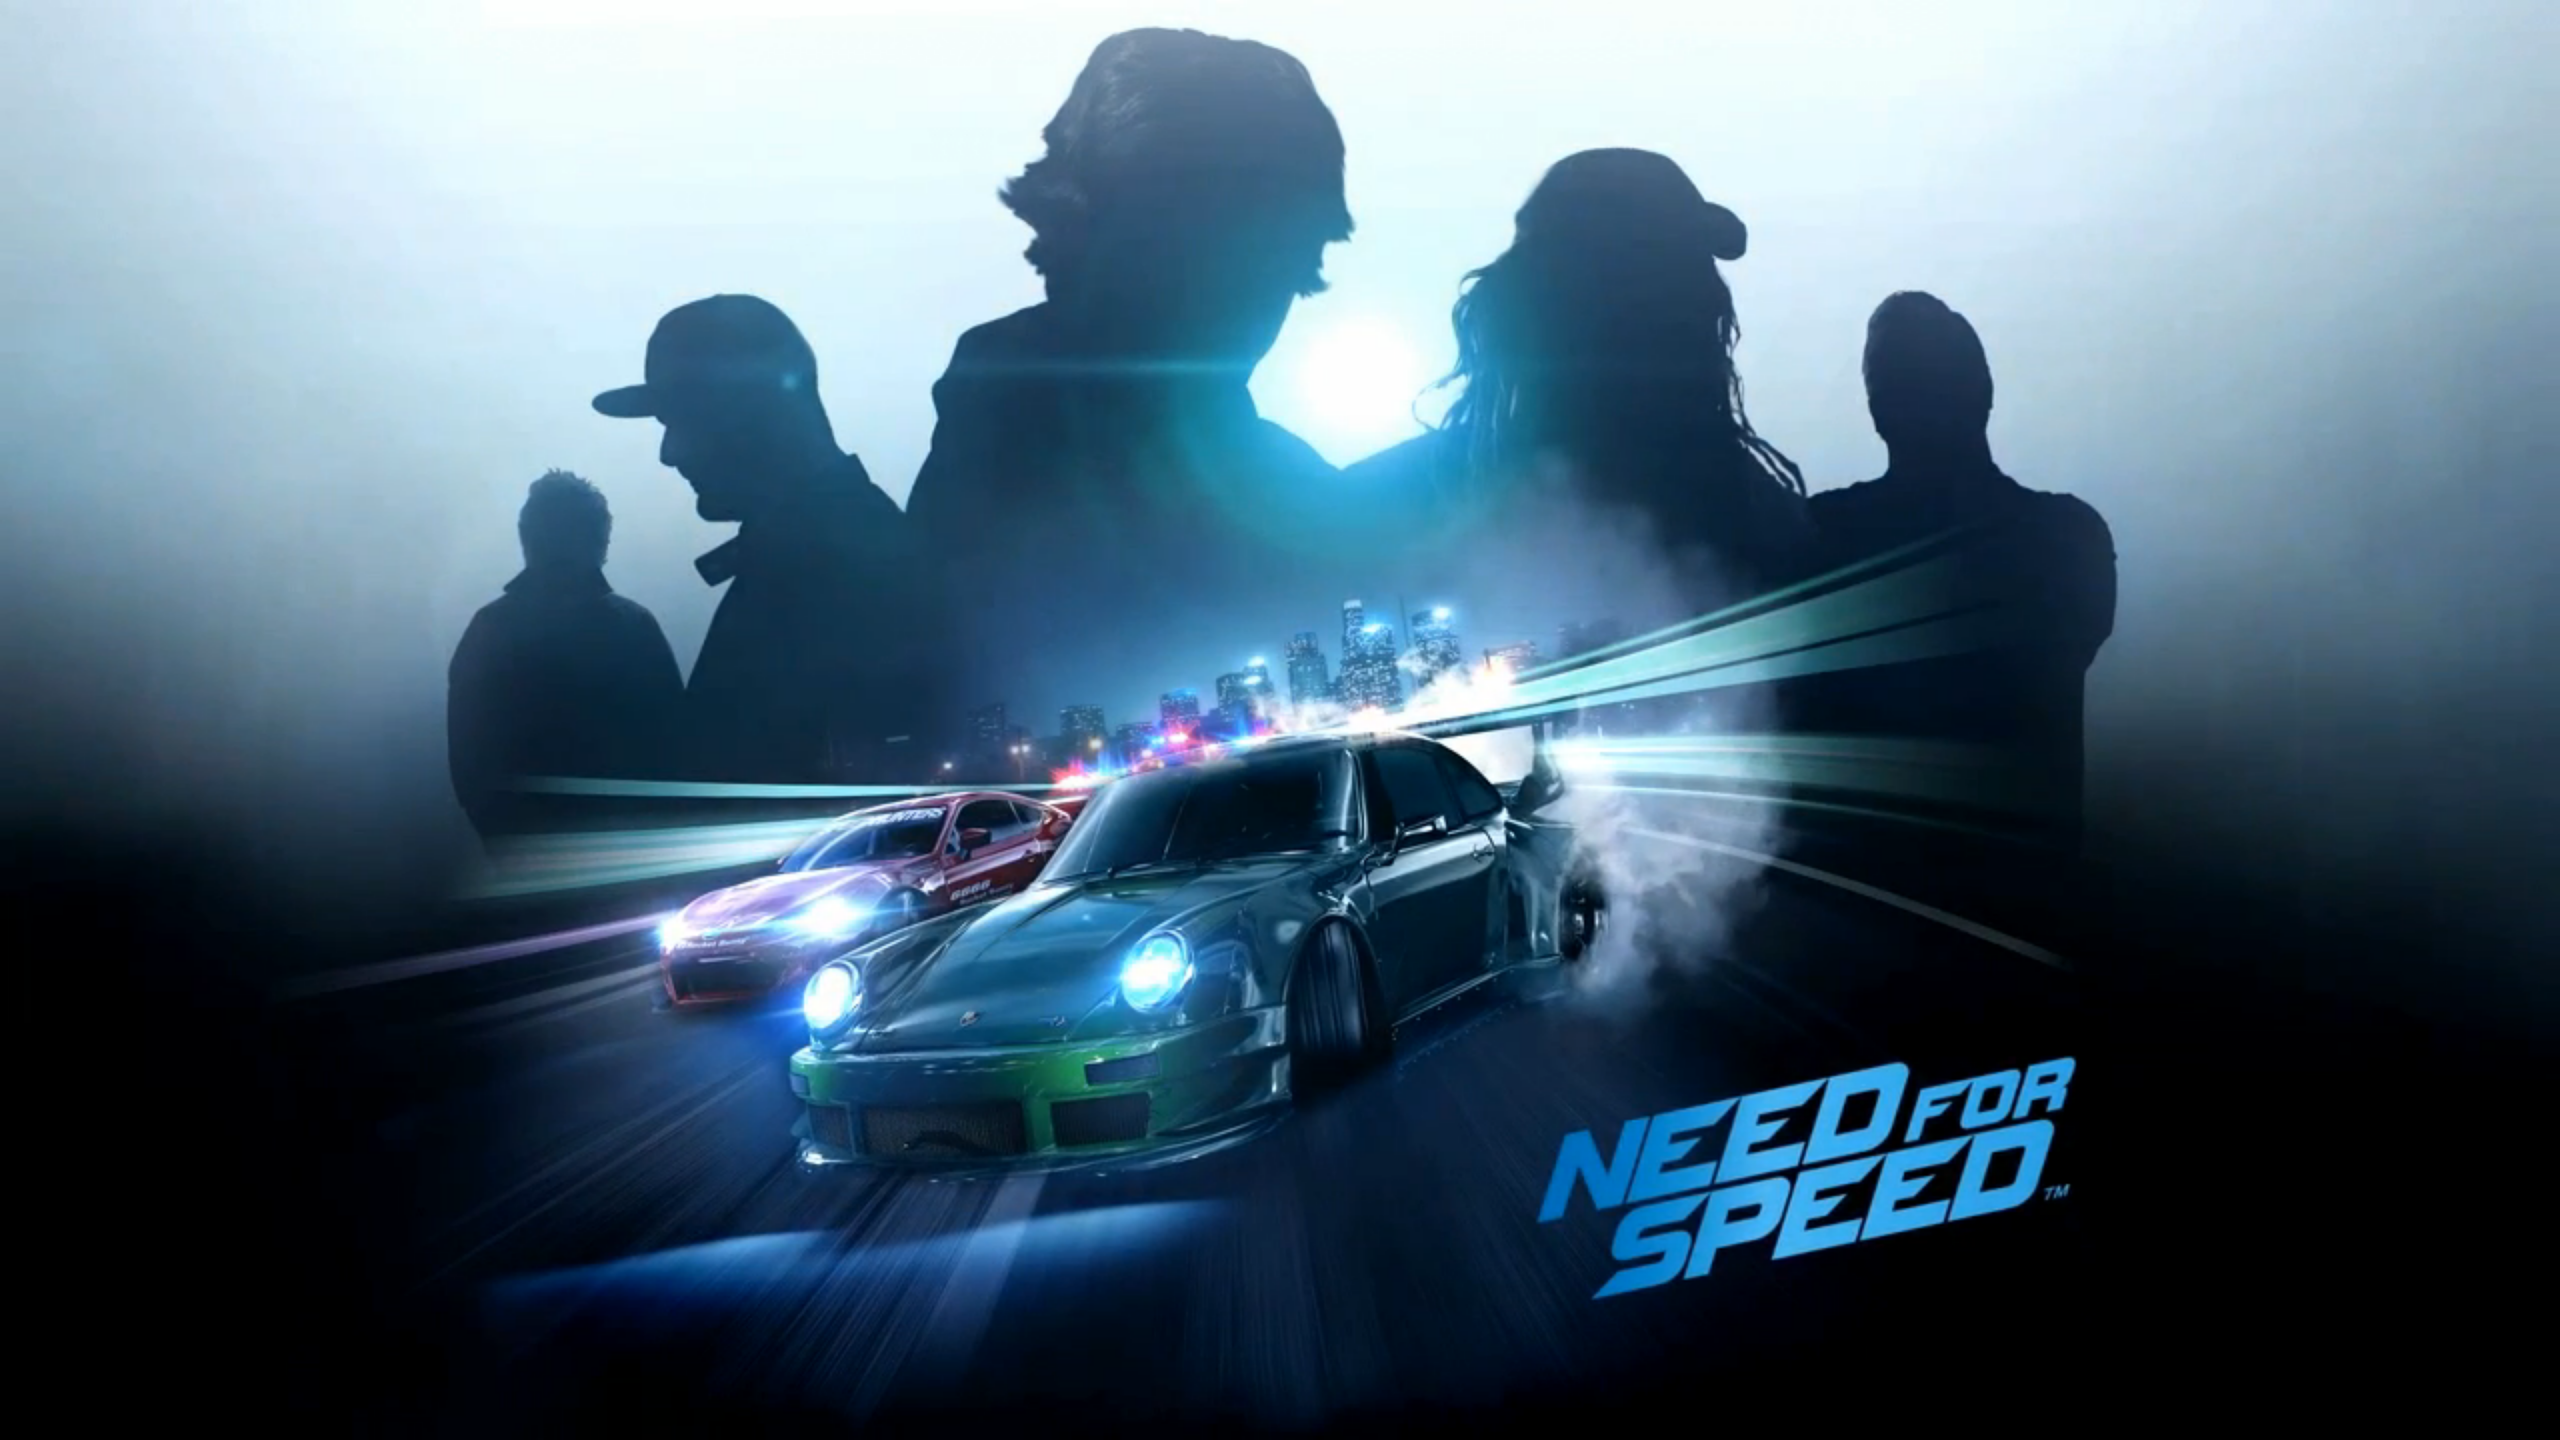 Need for Speed 2015 for 2560x1440 HDTV resolution